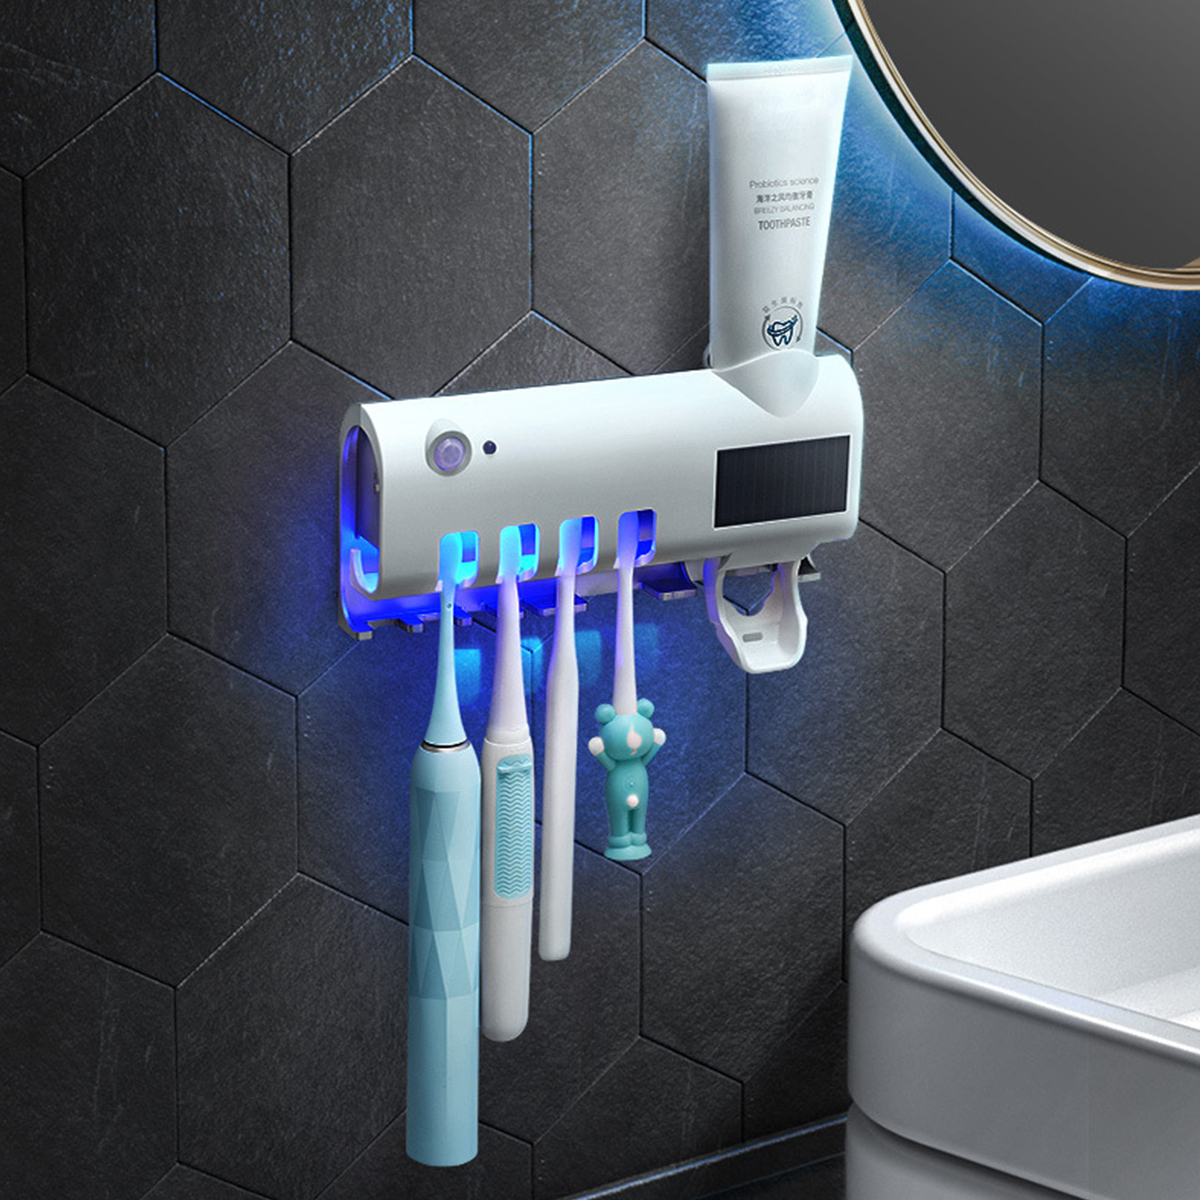 Solar-Charging-Infrared-Toothbrush-Sterilizer-Holder-Automatic-Toothpaste-Dispenser-Magnetic-Suction-1622988-10